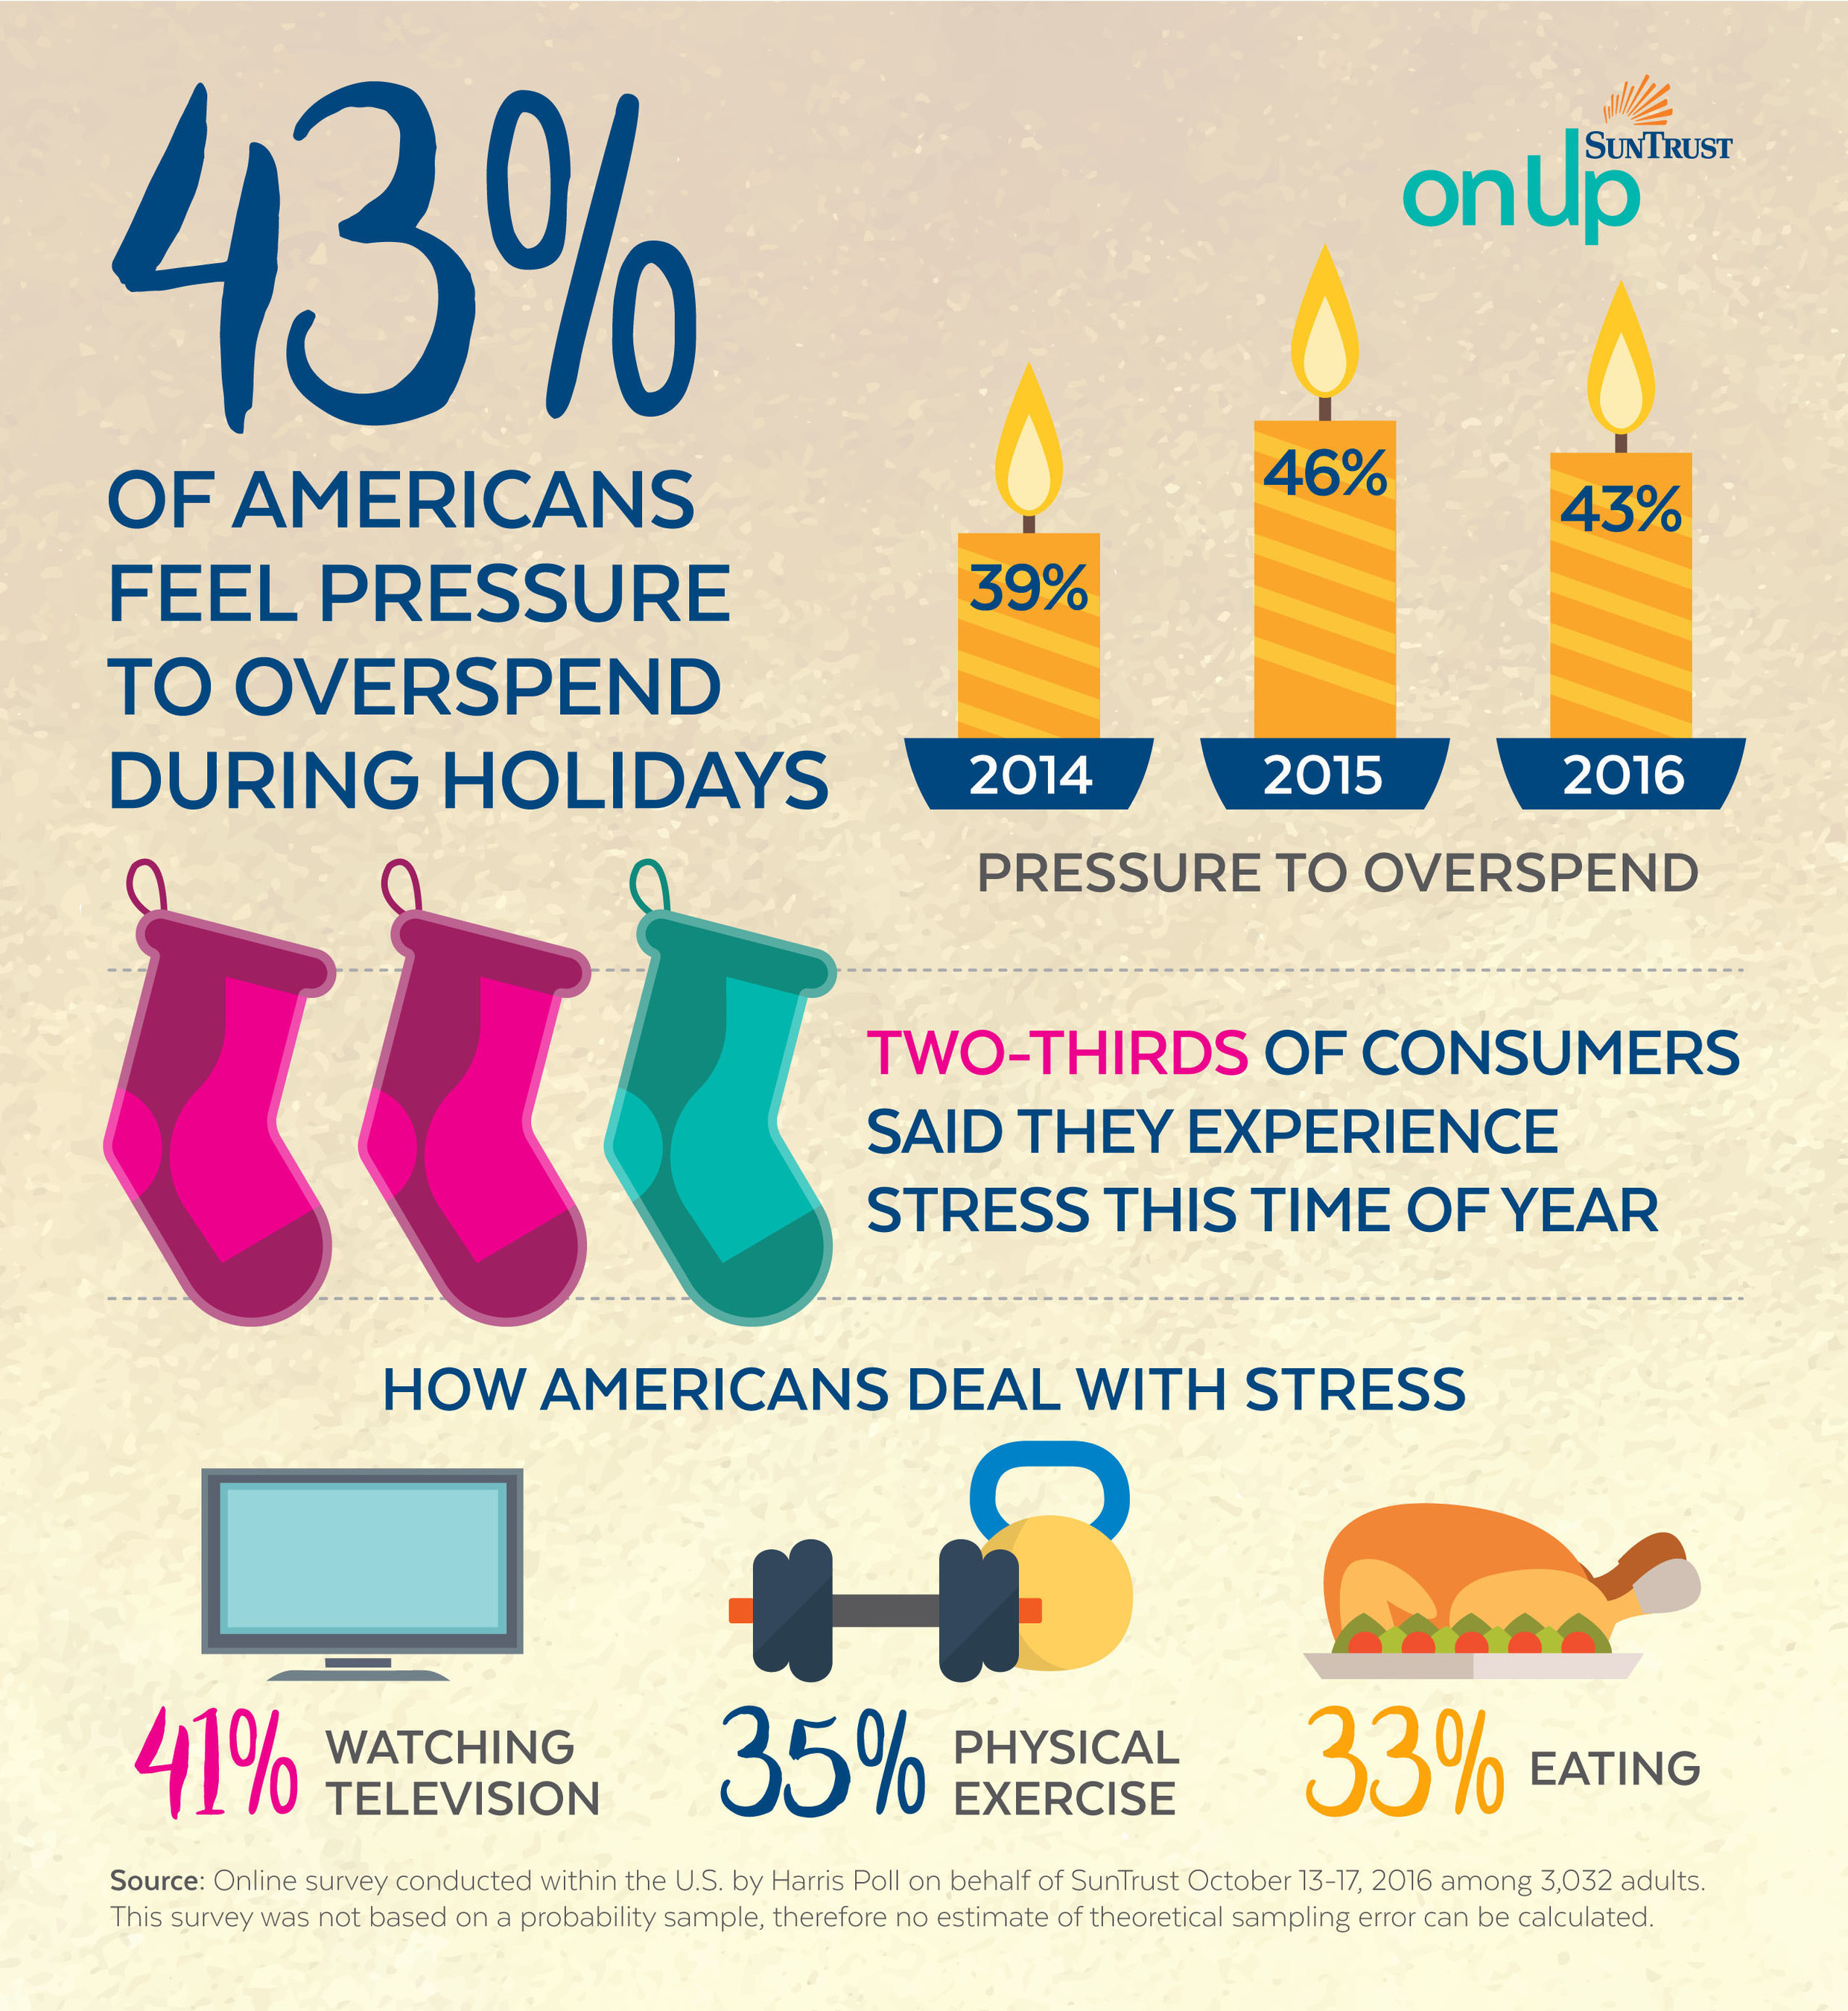 SunTrust annual Holiday Financial Confidence Survey reveals that 43 percent of Americans feel pressure to spend more than they can afford during the holiday season.